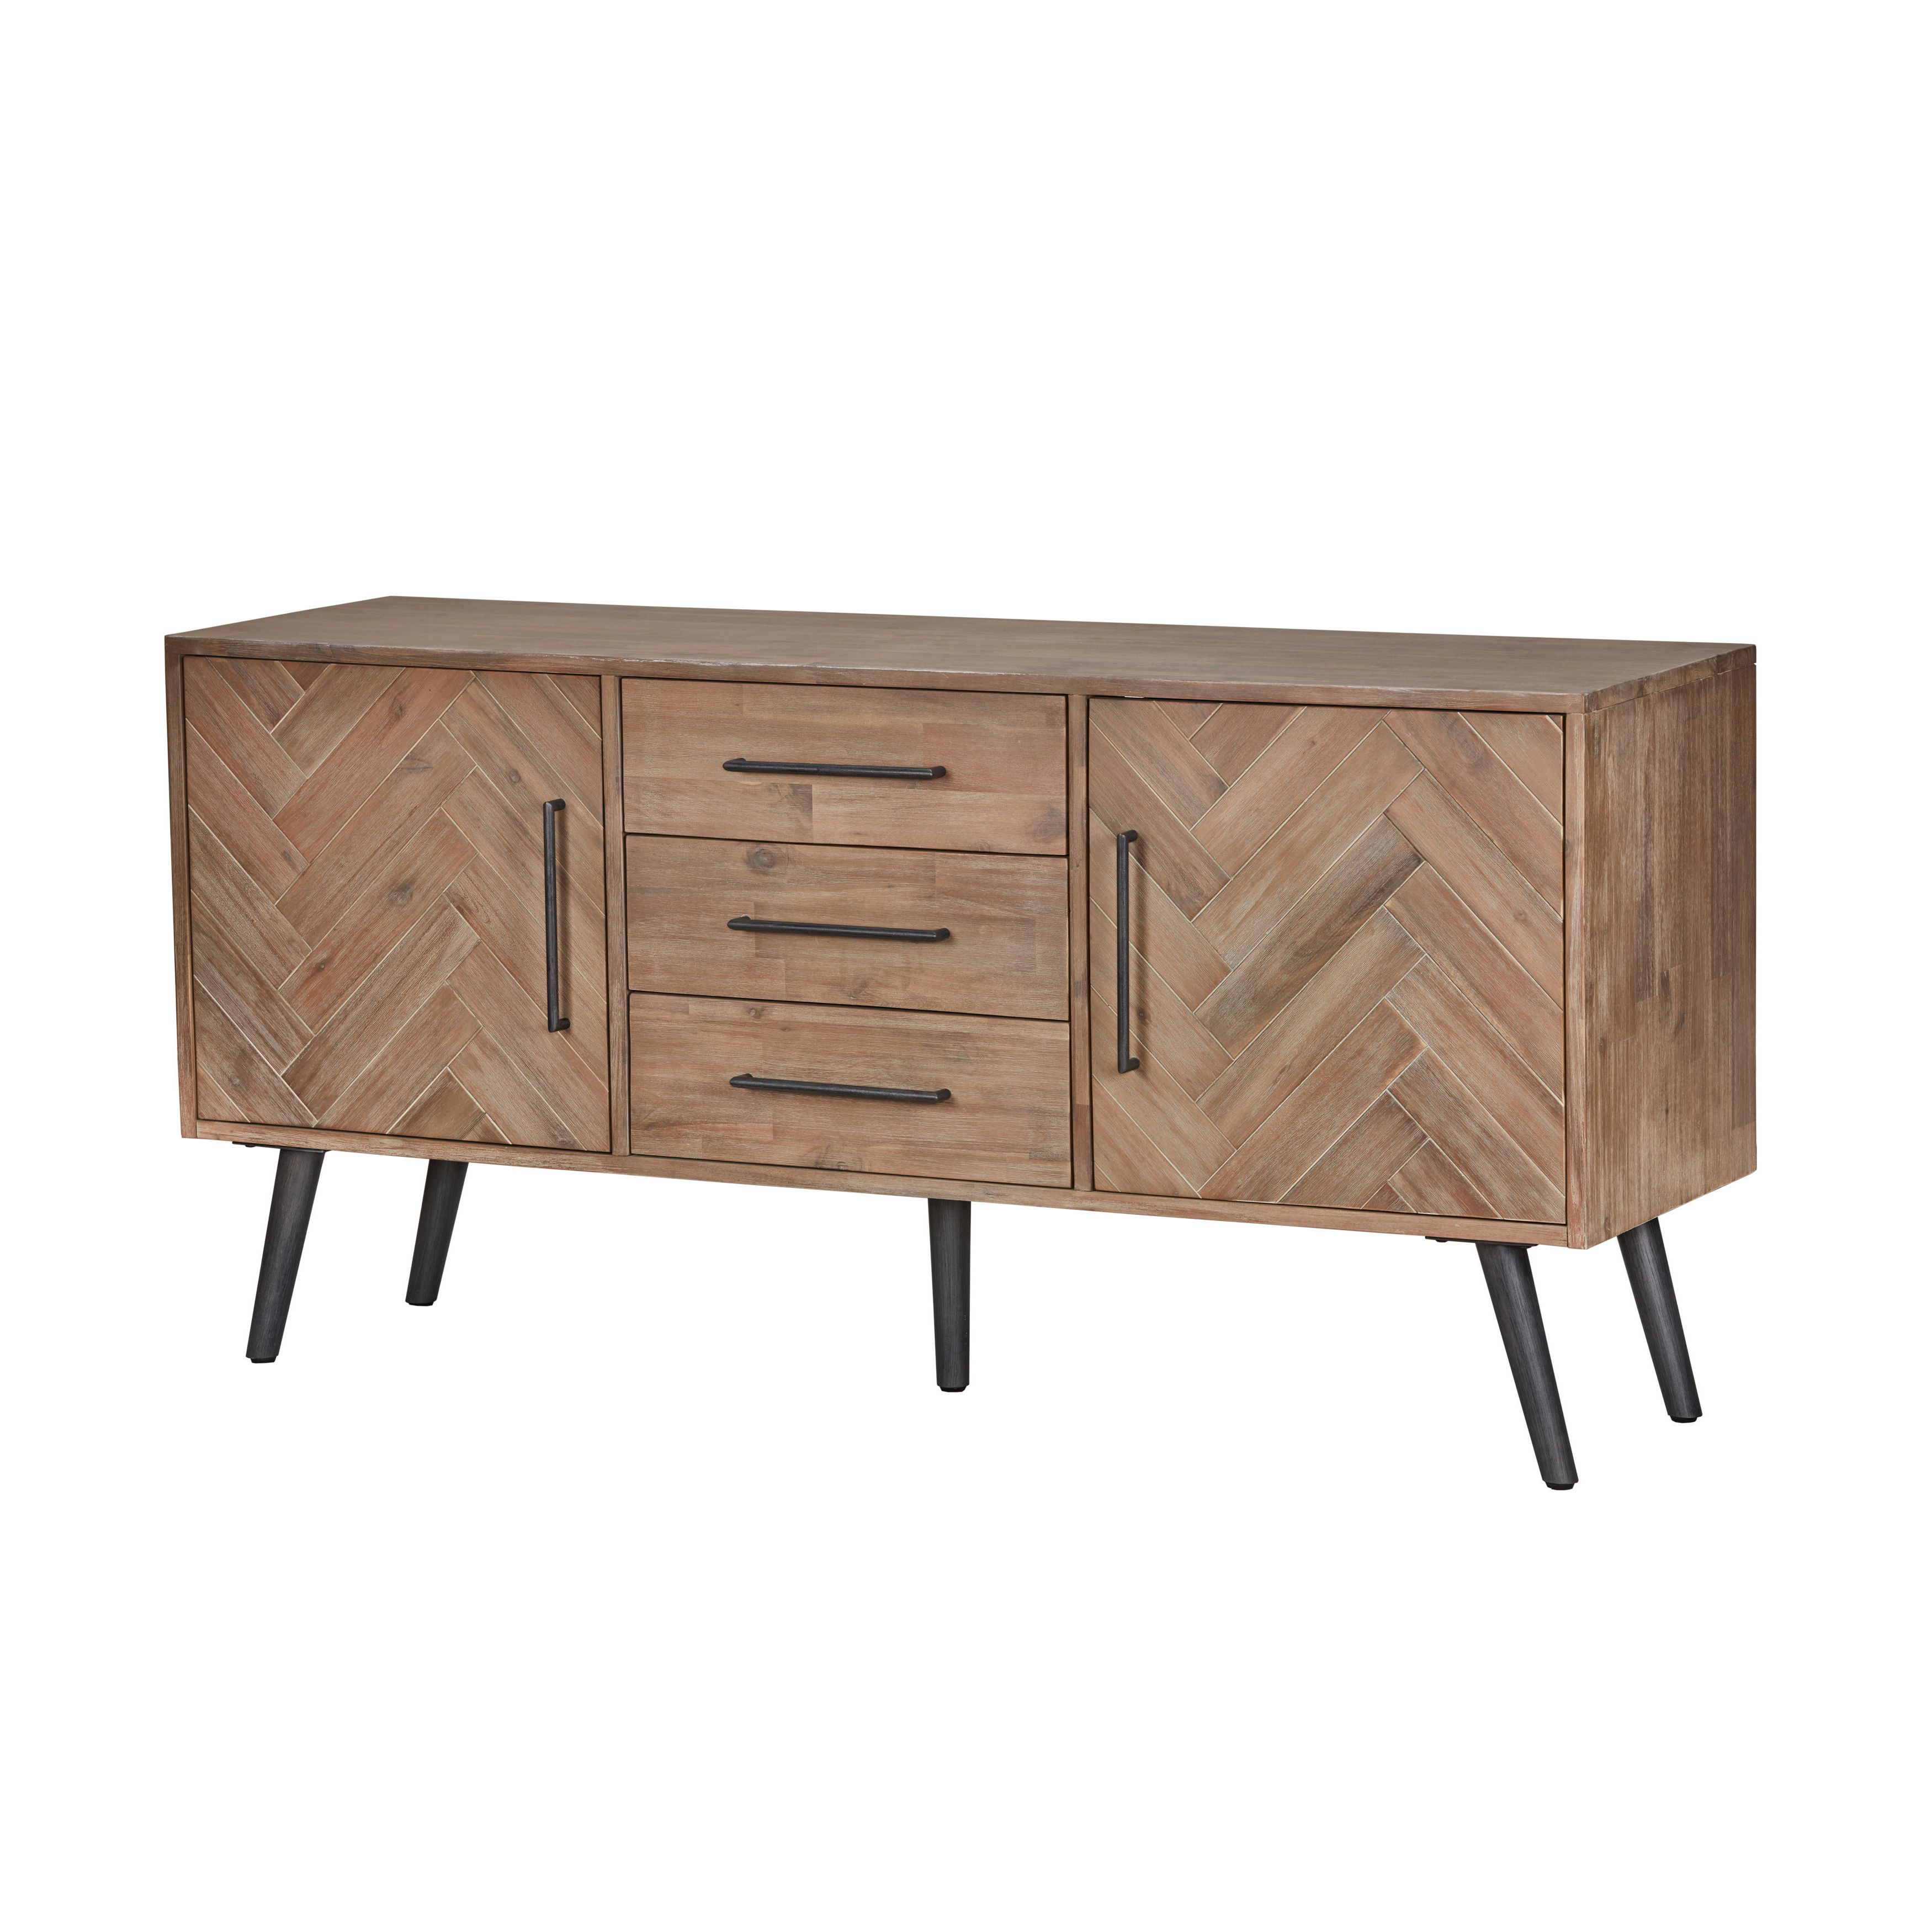 Distressed Finish Sideboards & Buffets | Joss & Main Pertaining To Giulia 3 Drawer Credenzas (Gallery 15 of 20)